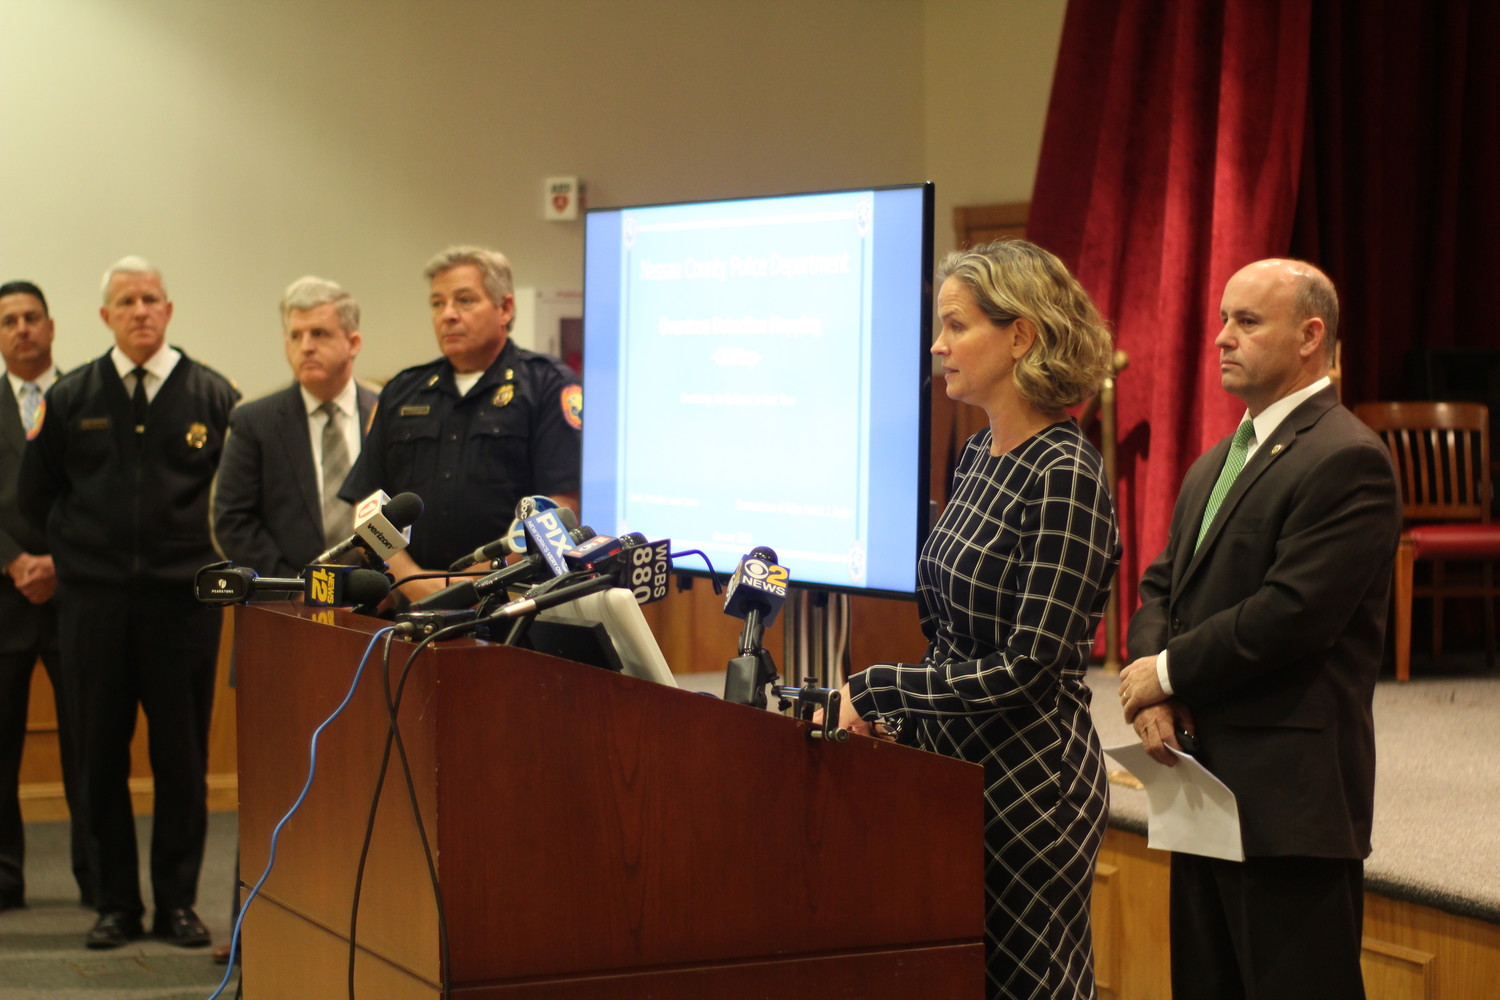 Nassau County Executive Laura Curran spoke about how real-time data that will help the police department tackle the county’s overdose problem, while Nassau County Police chiefs and other local elected leaders stood in attendance.